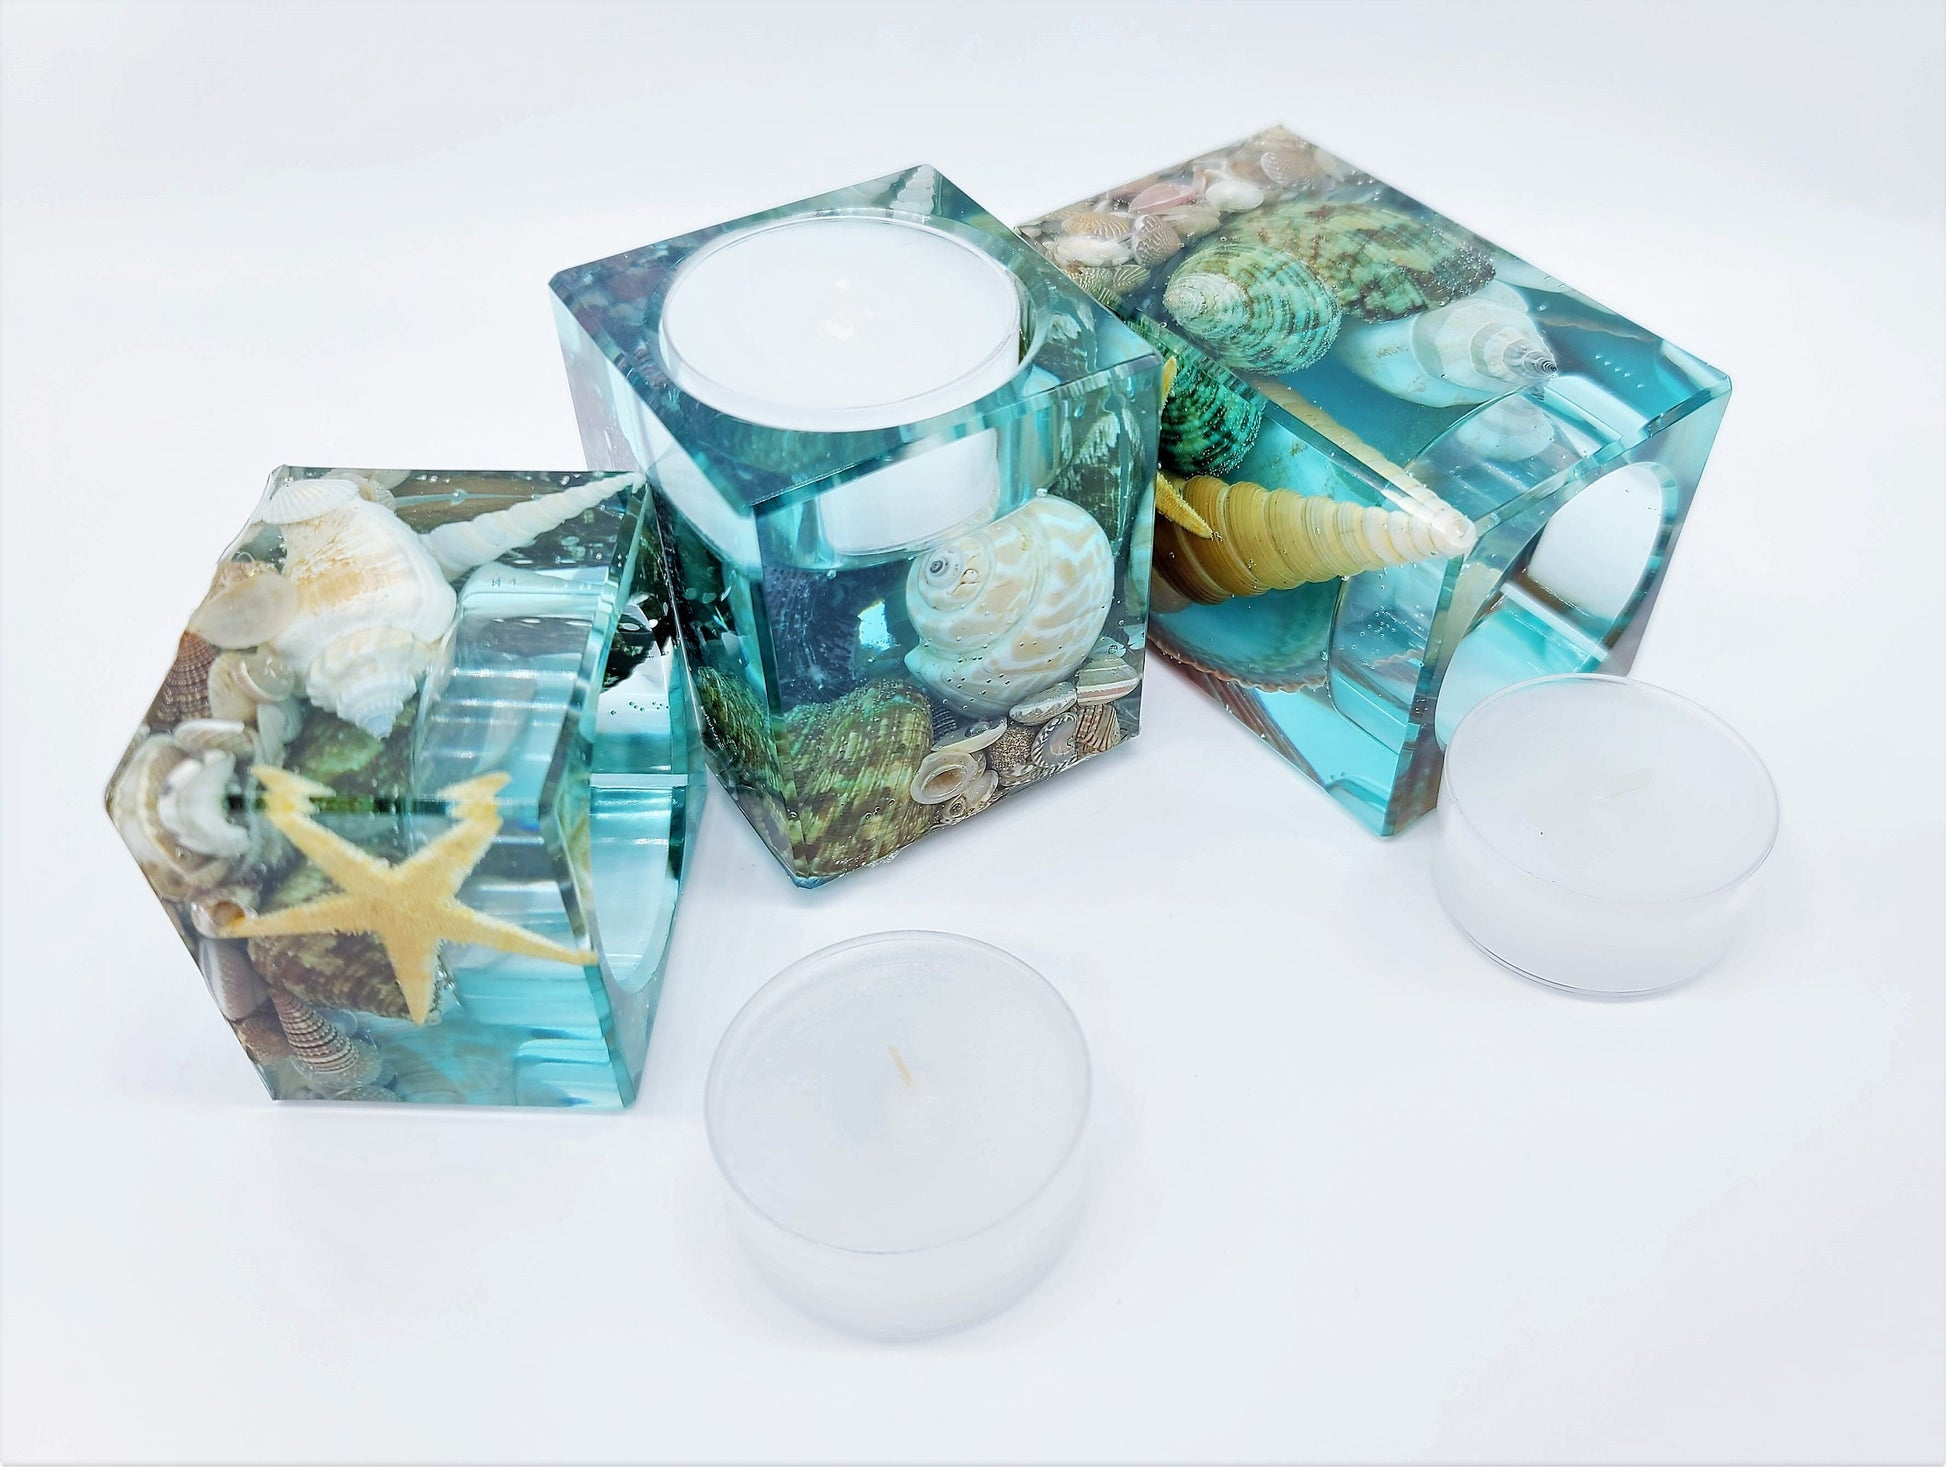 Seascape Candle Holder Made with Eco-Friendly Epoxy Resin and Seashells - Includes Choice of Real UNSCENTED Tealight or LED Tealight